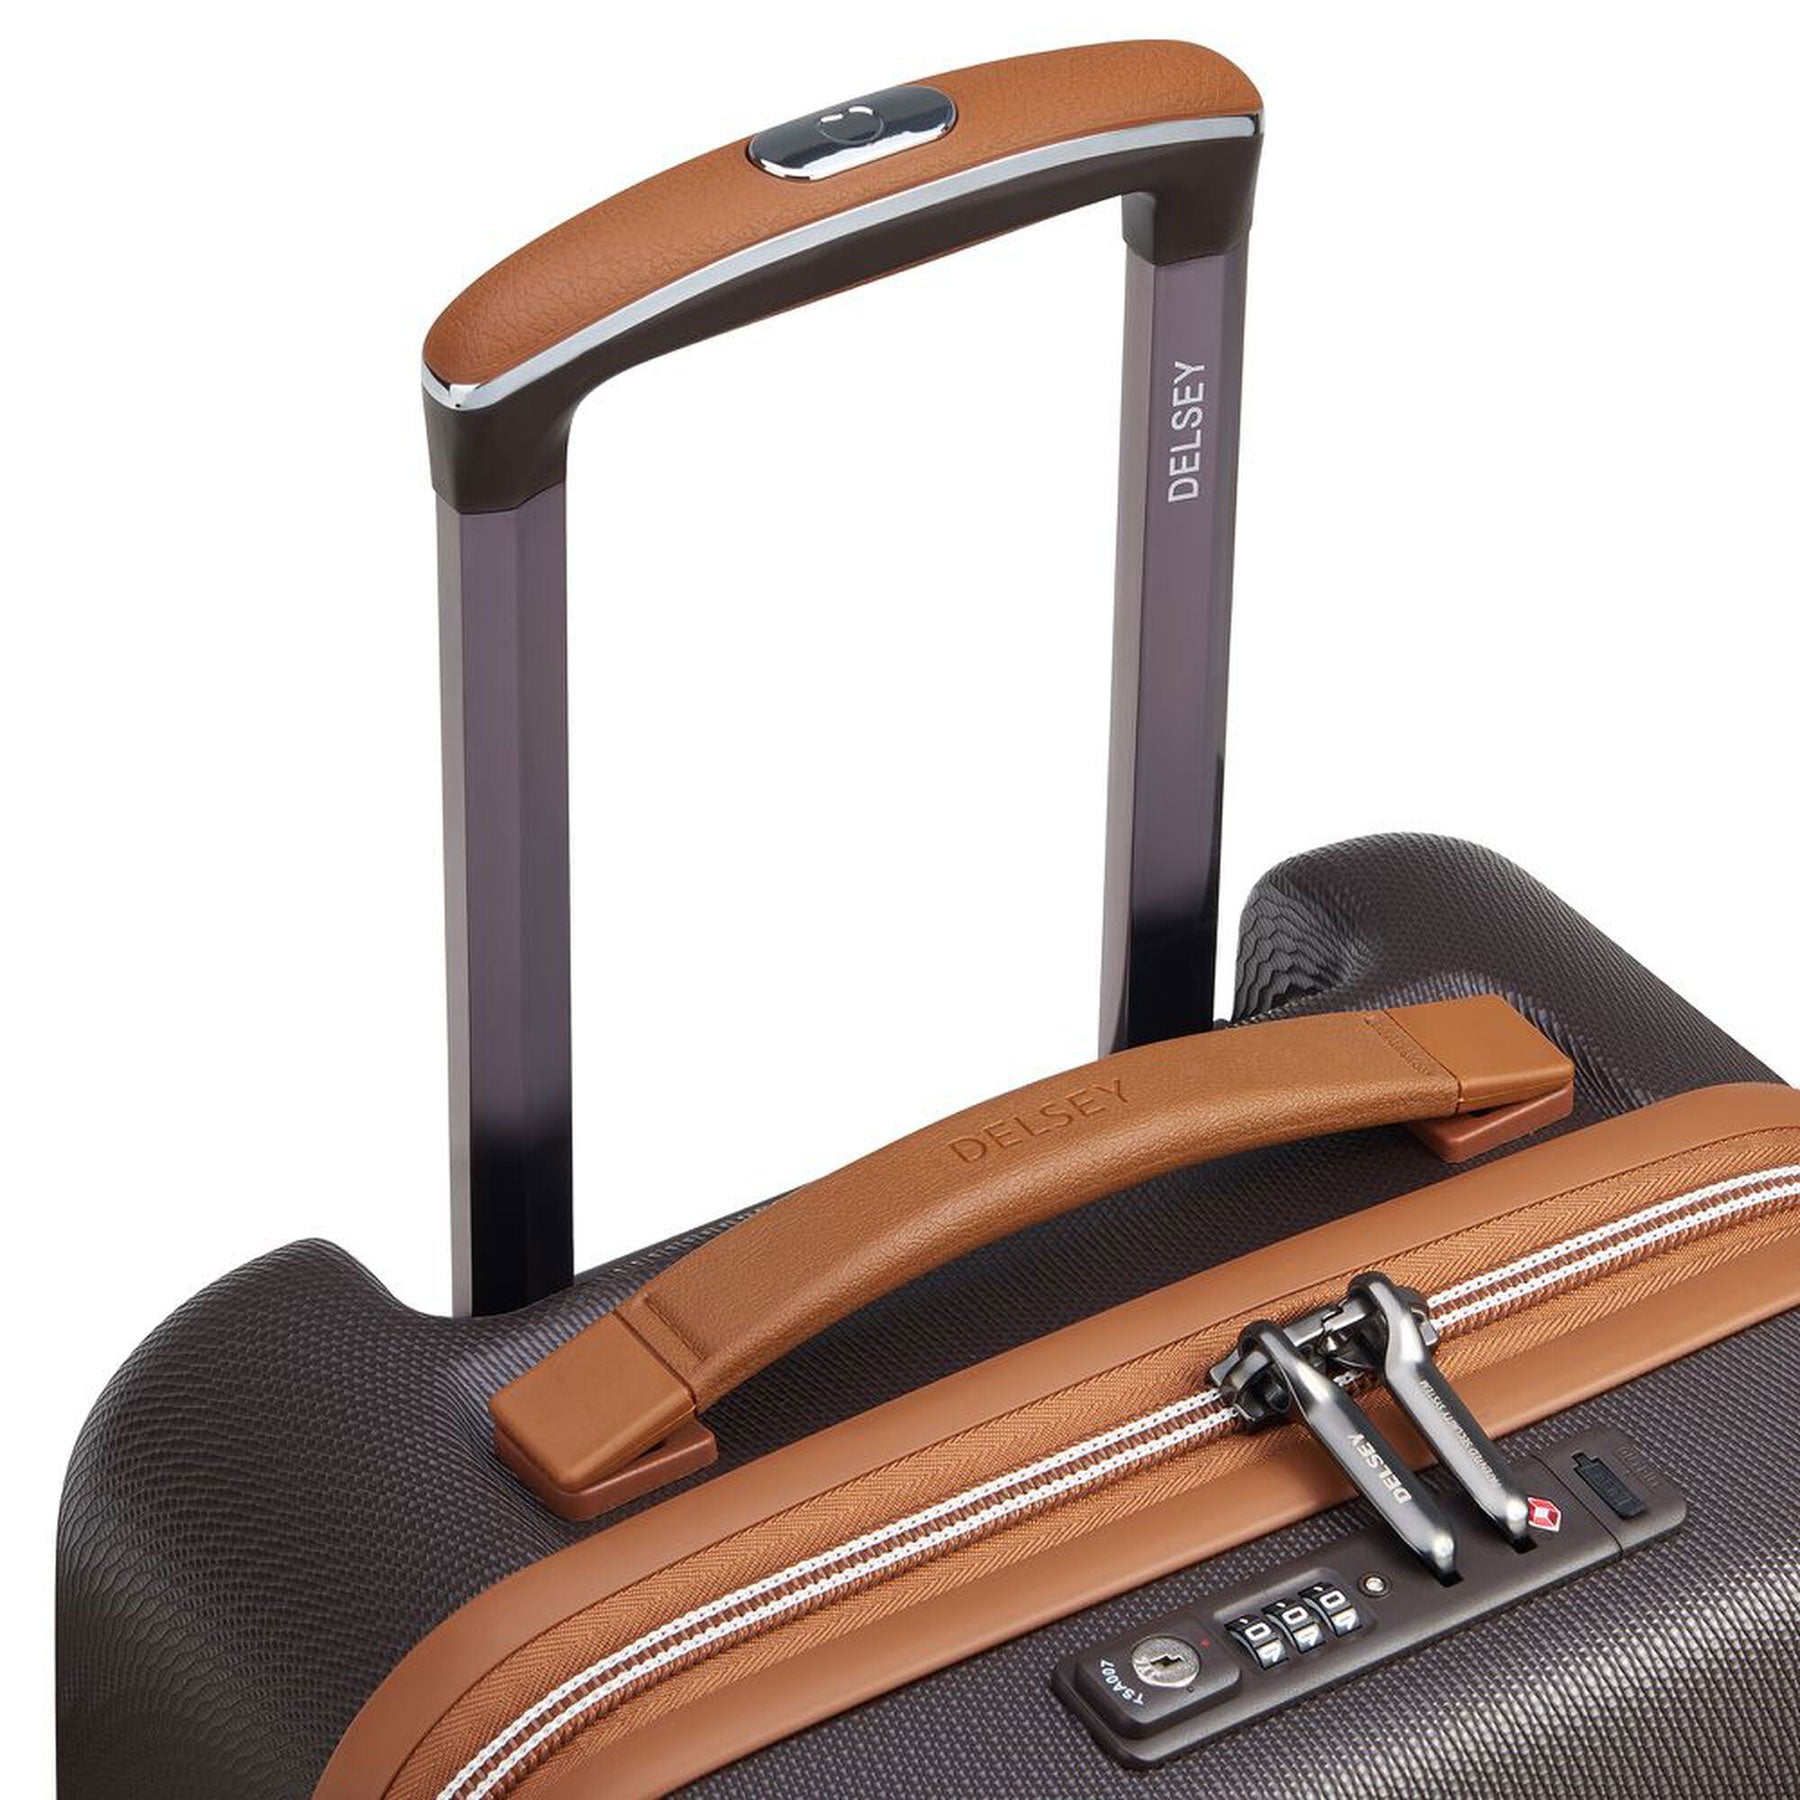 Delsey Chatelet Air 2.0 International Carry-on Spinner Upright